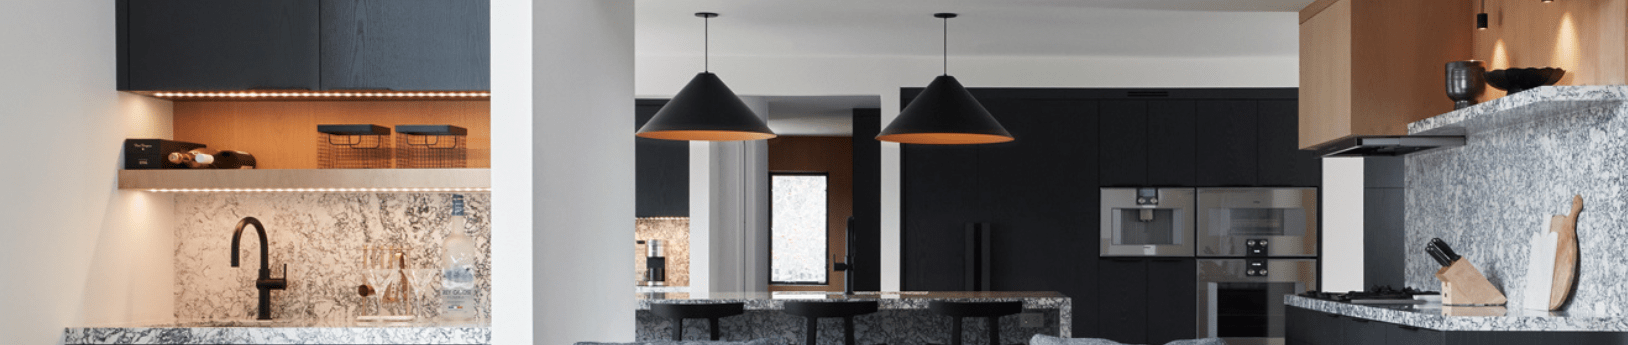 Modern kitchen with black painted cabinetry and natural rift oak accents 